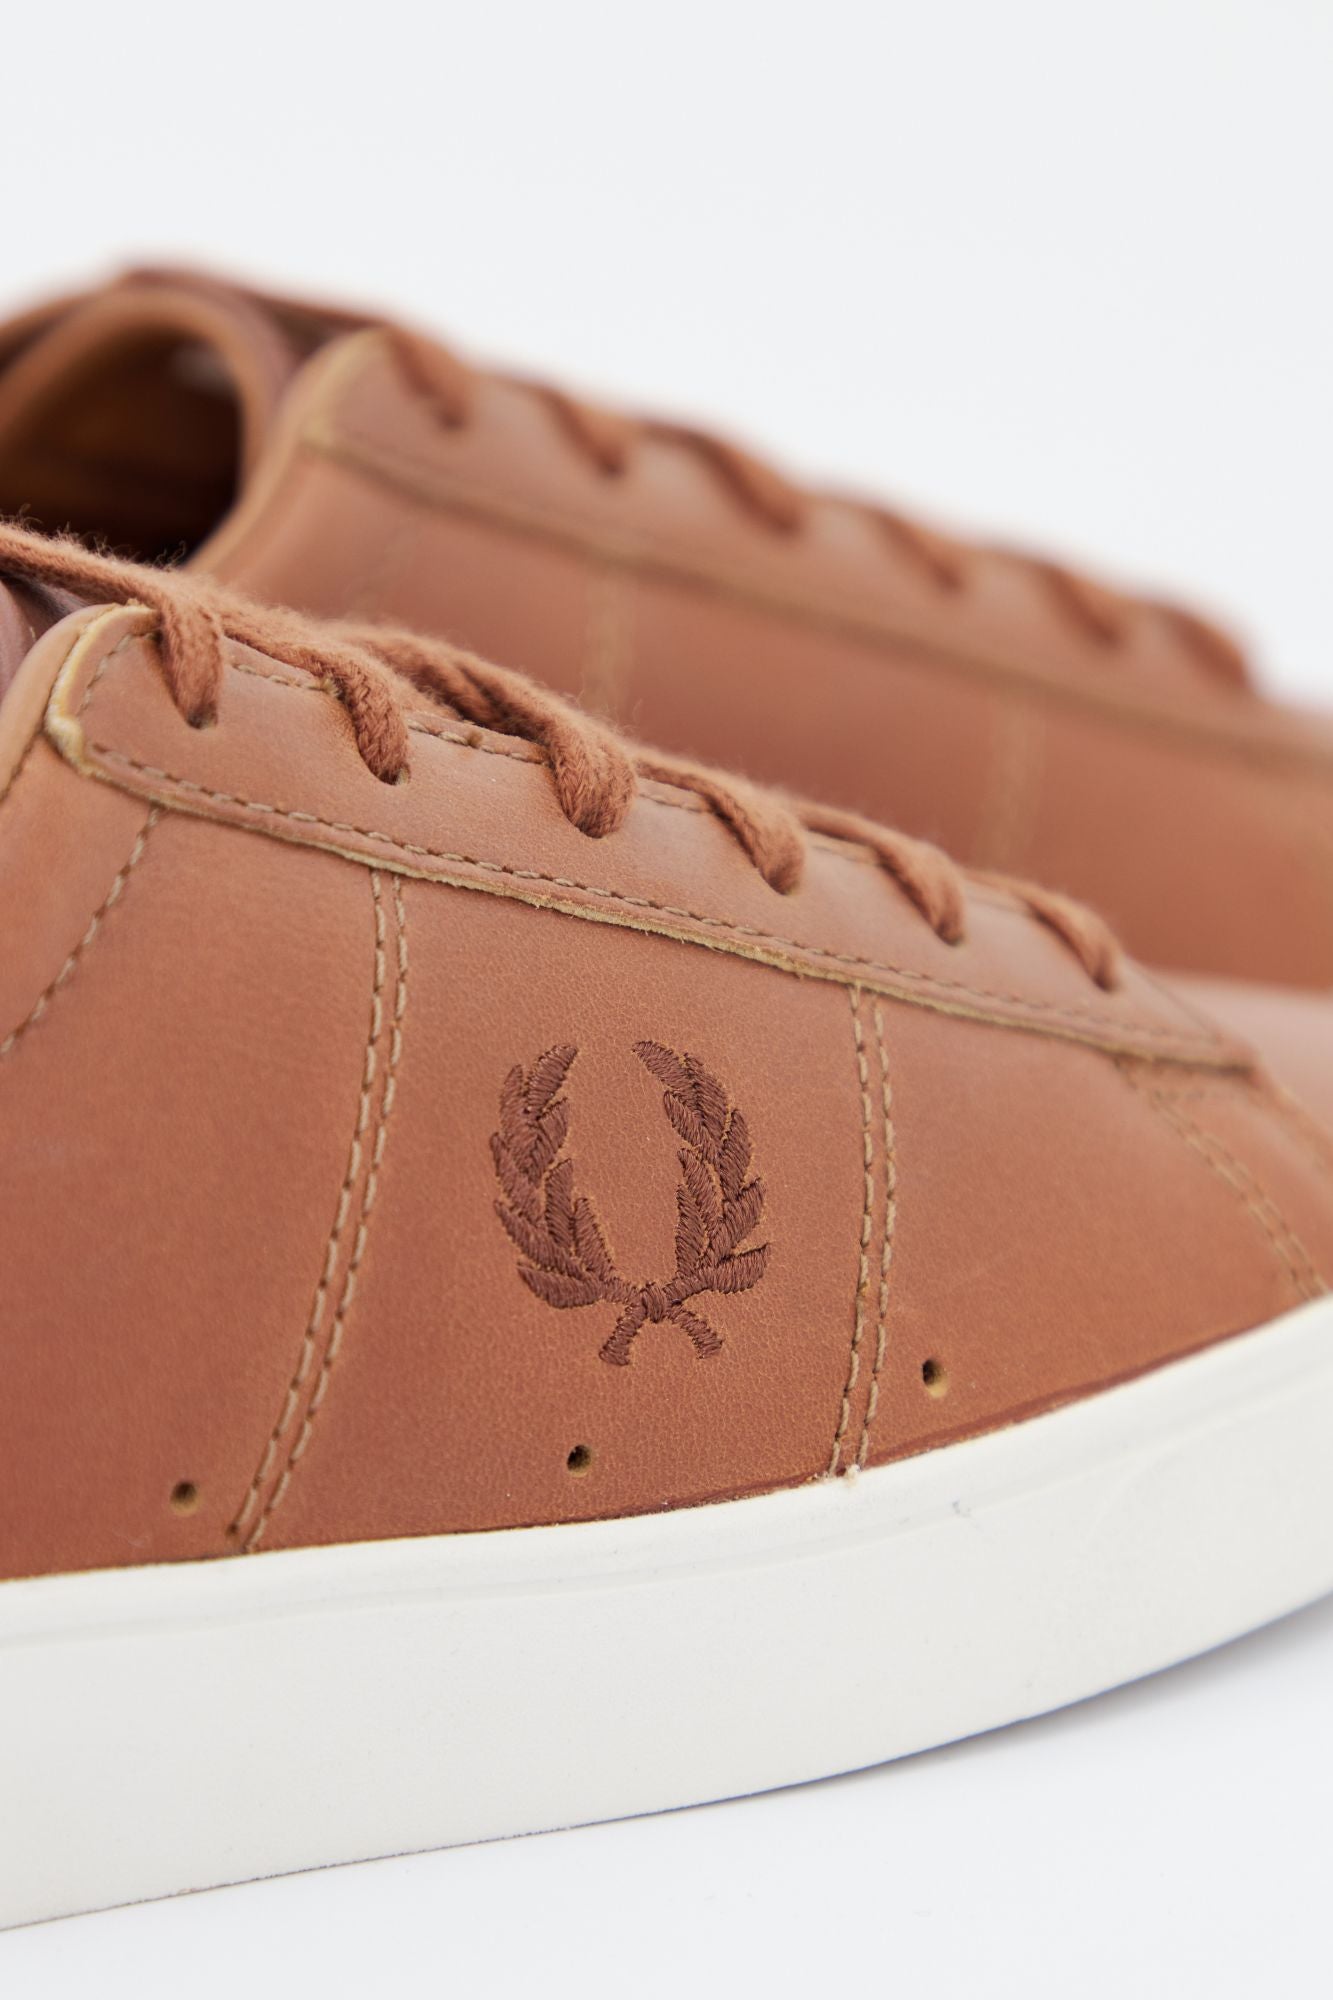 FRED PERRY SPENCER WAXED LEATH en color MARRON (4)